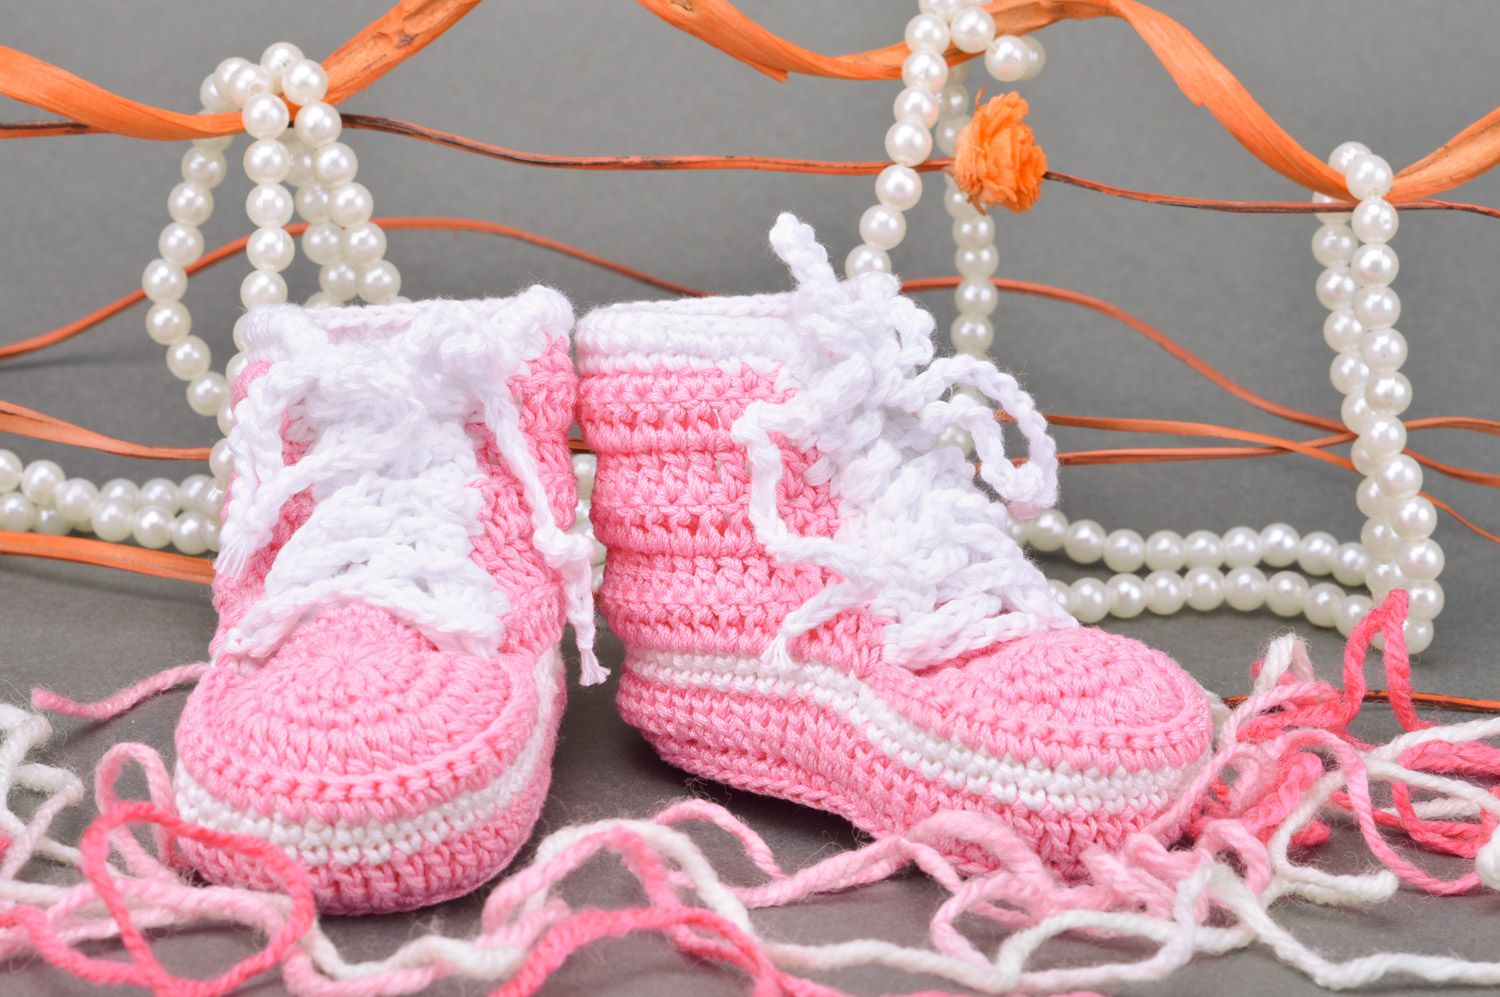 Handmade crocheted pink booties made of cotton in the form of sneakers for girls photo 1